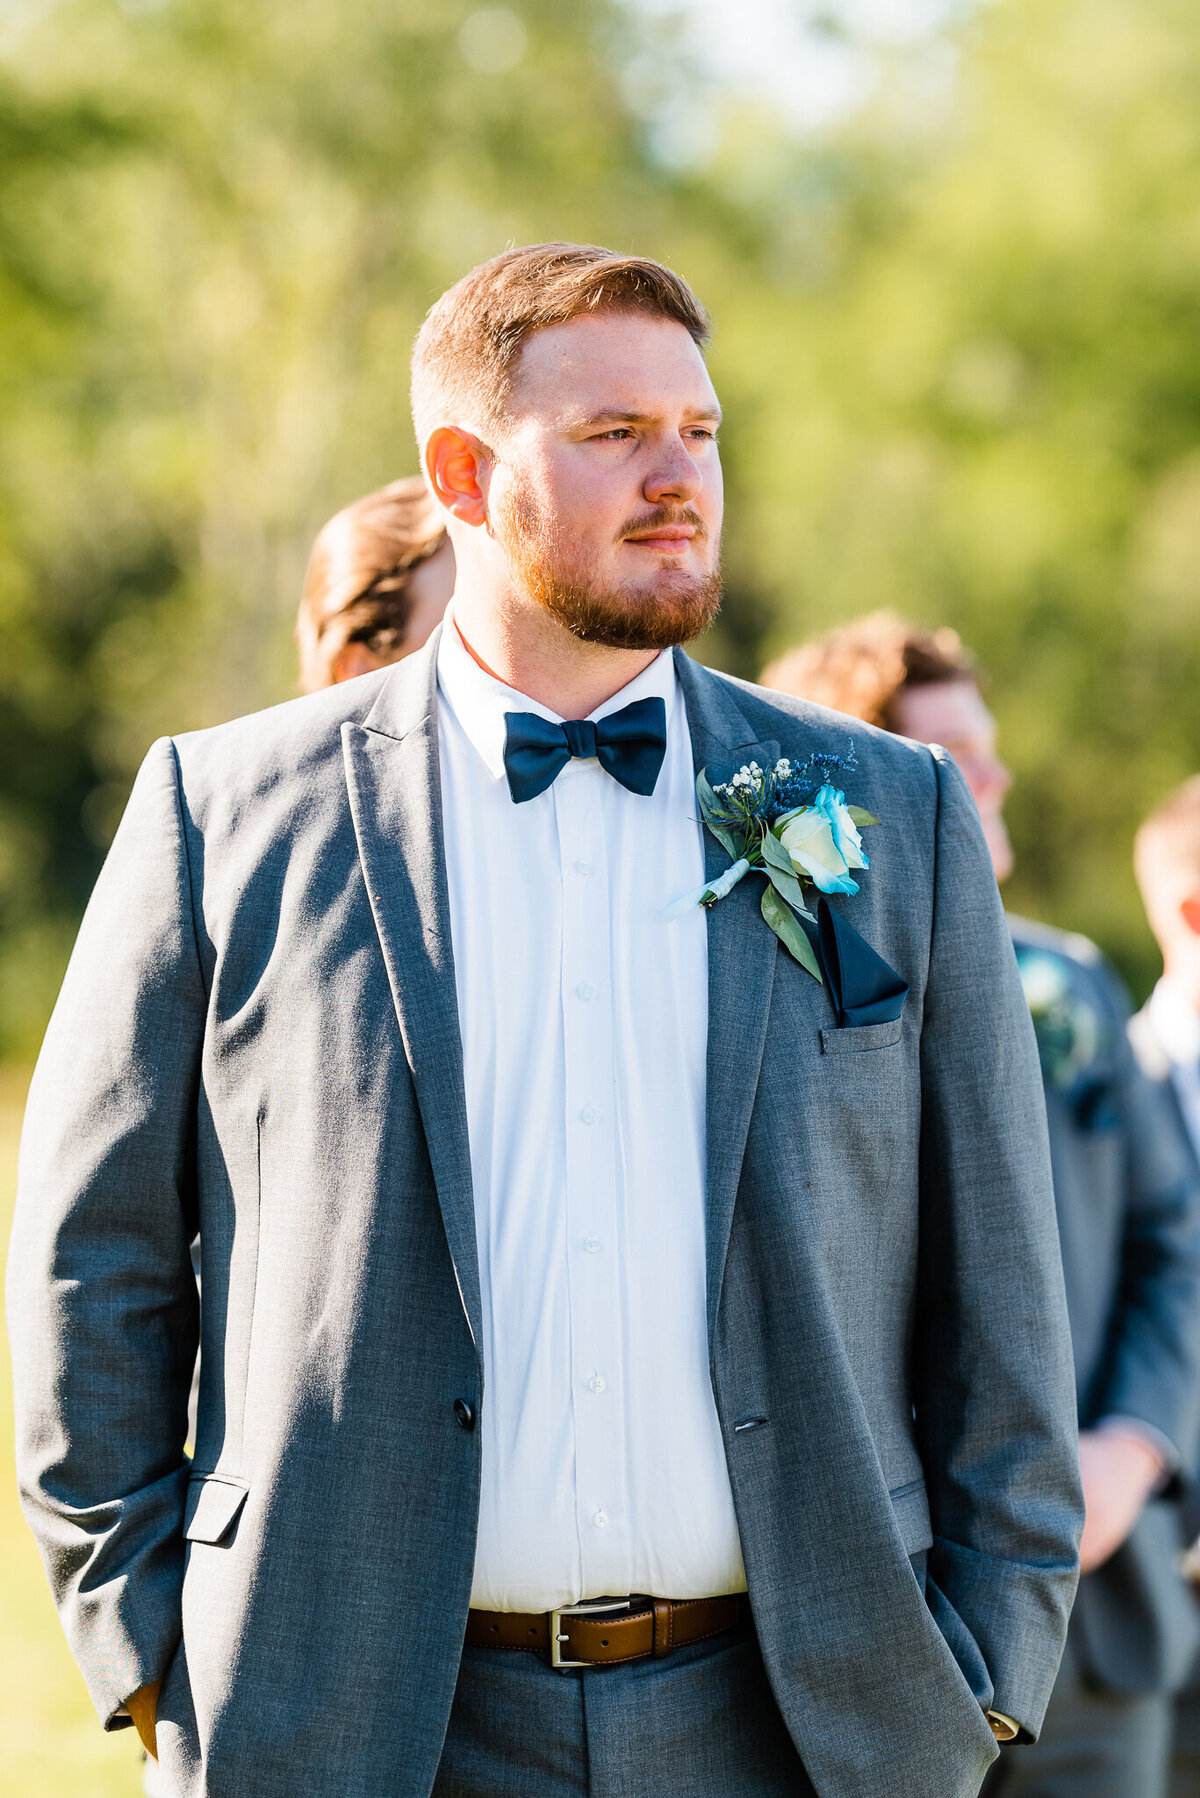 groom standing with his hands in his pockets and looking down the aisle to see his brides entrance to their outdoor wedding ceremony